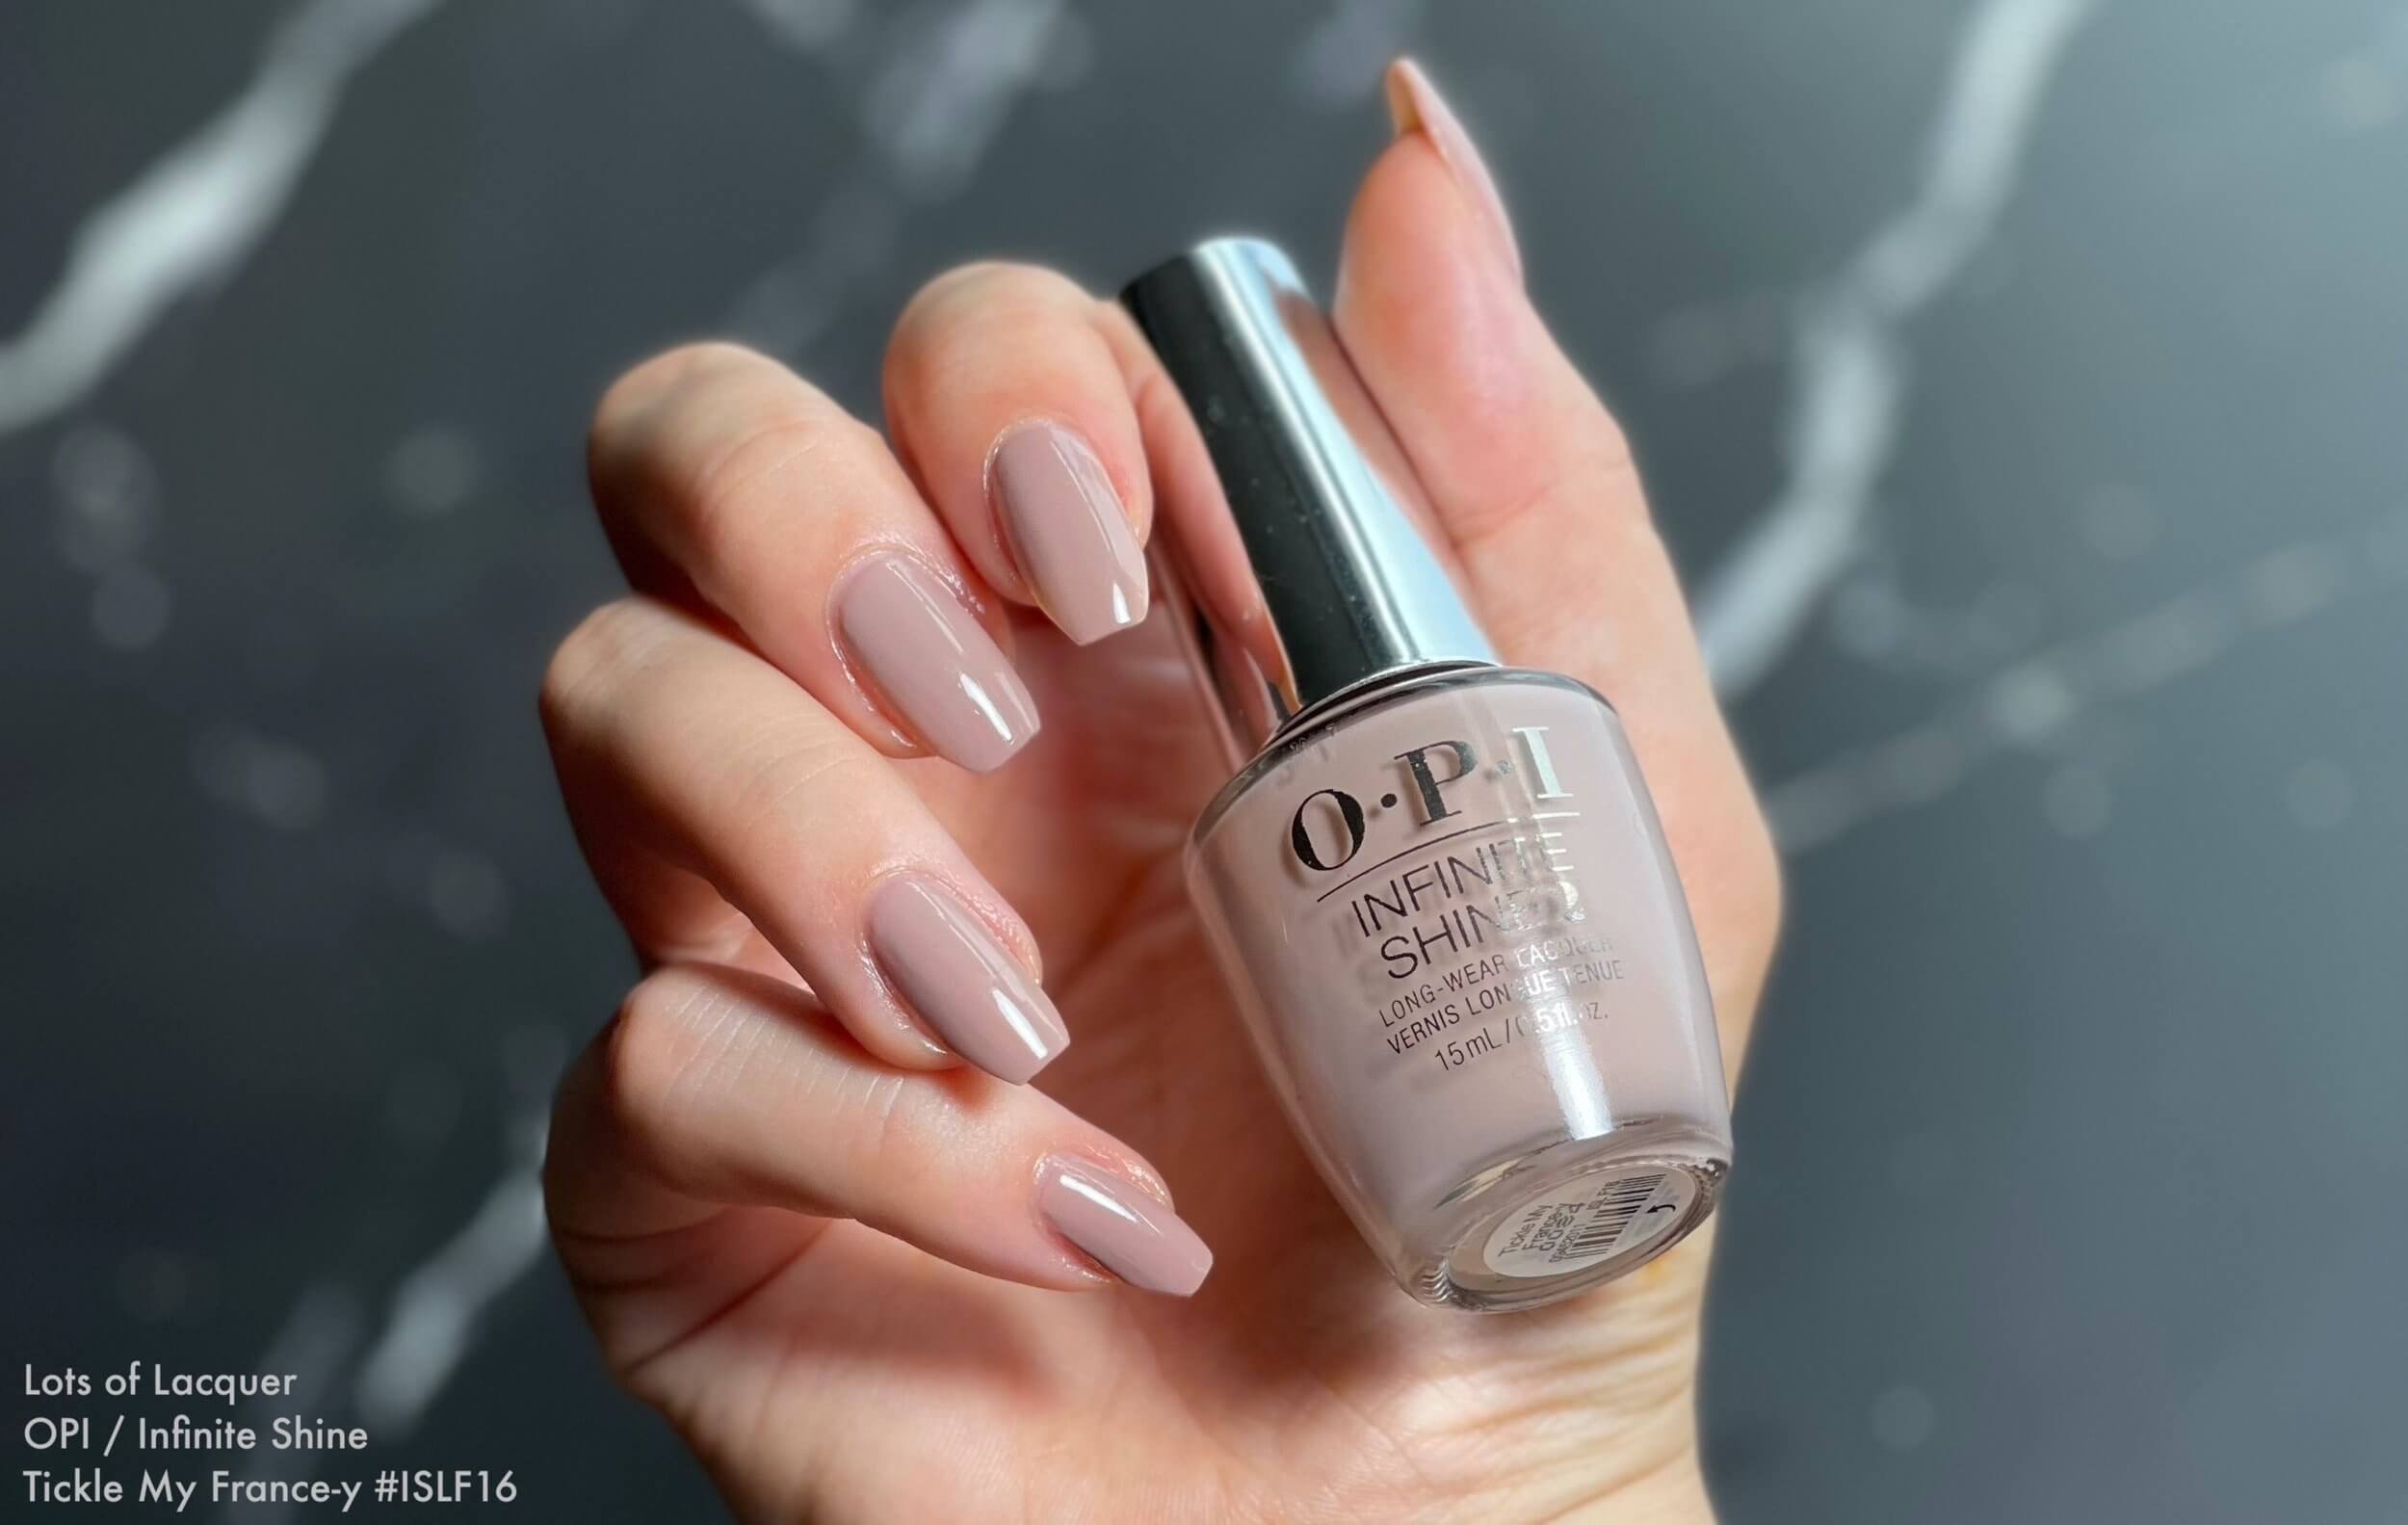 8. OPI "Tickle My France-y" - wide 6